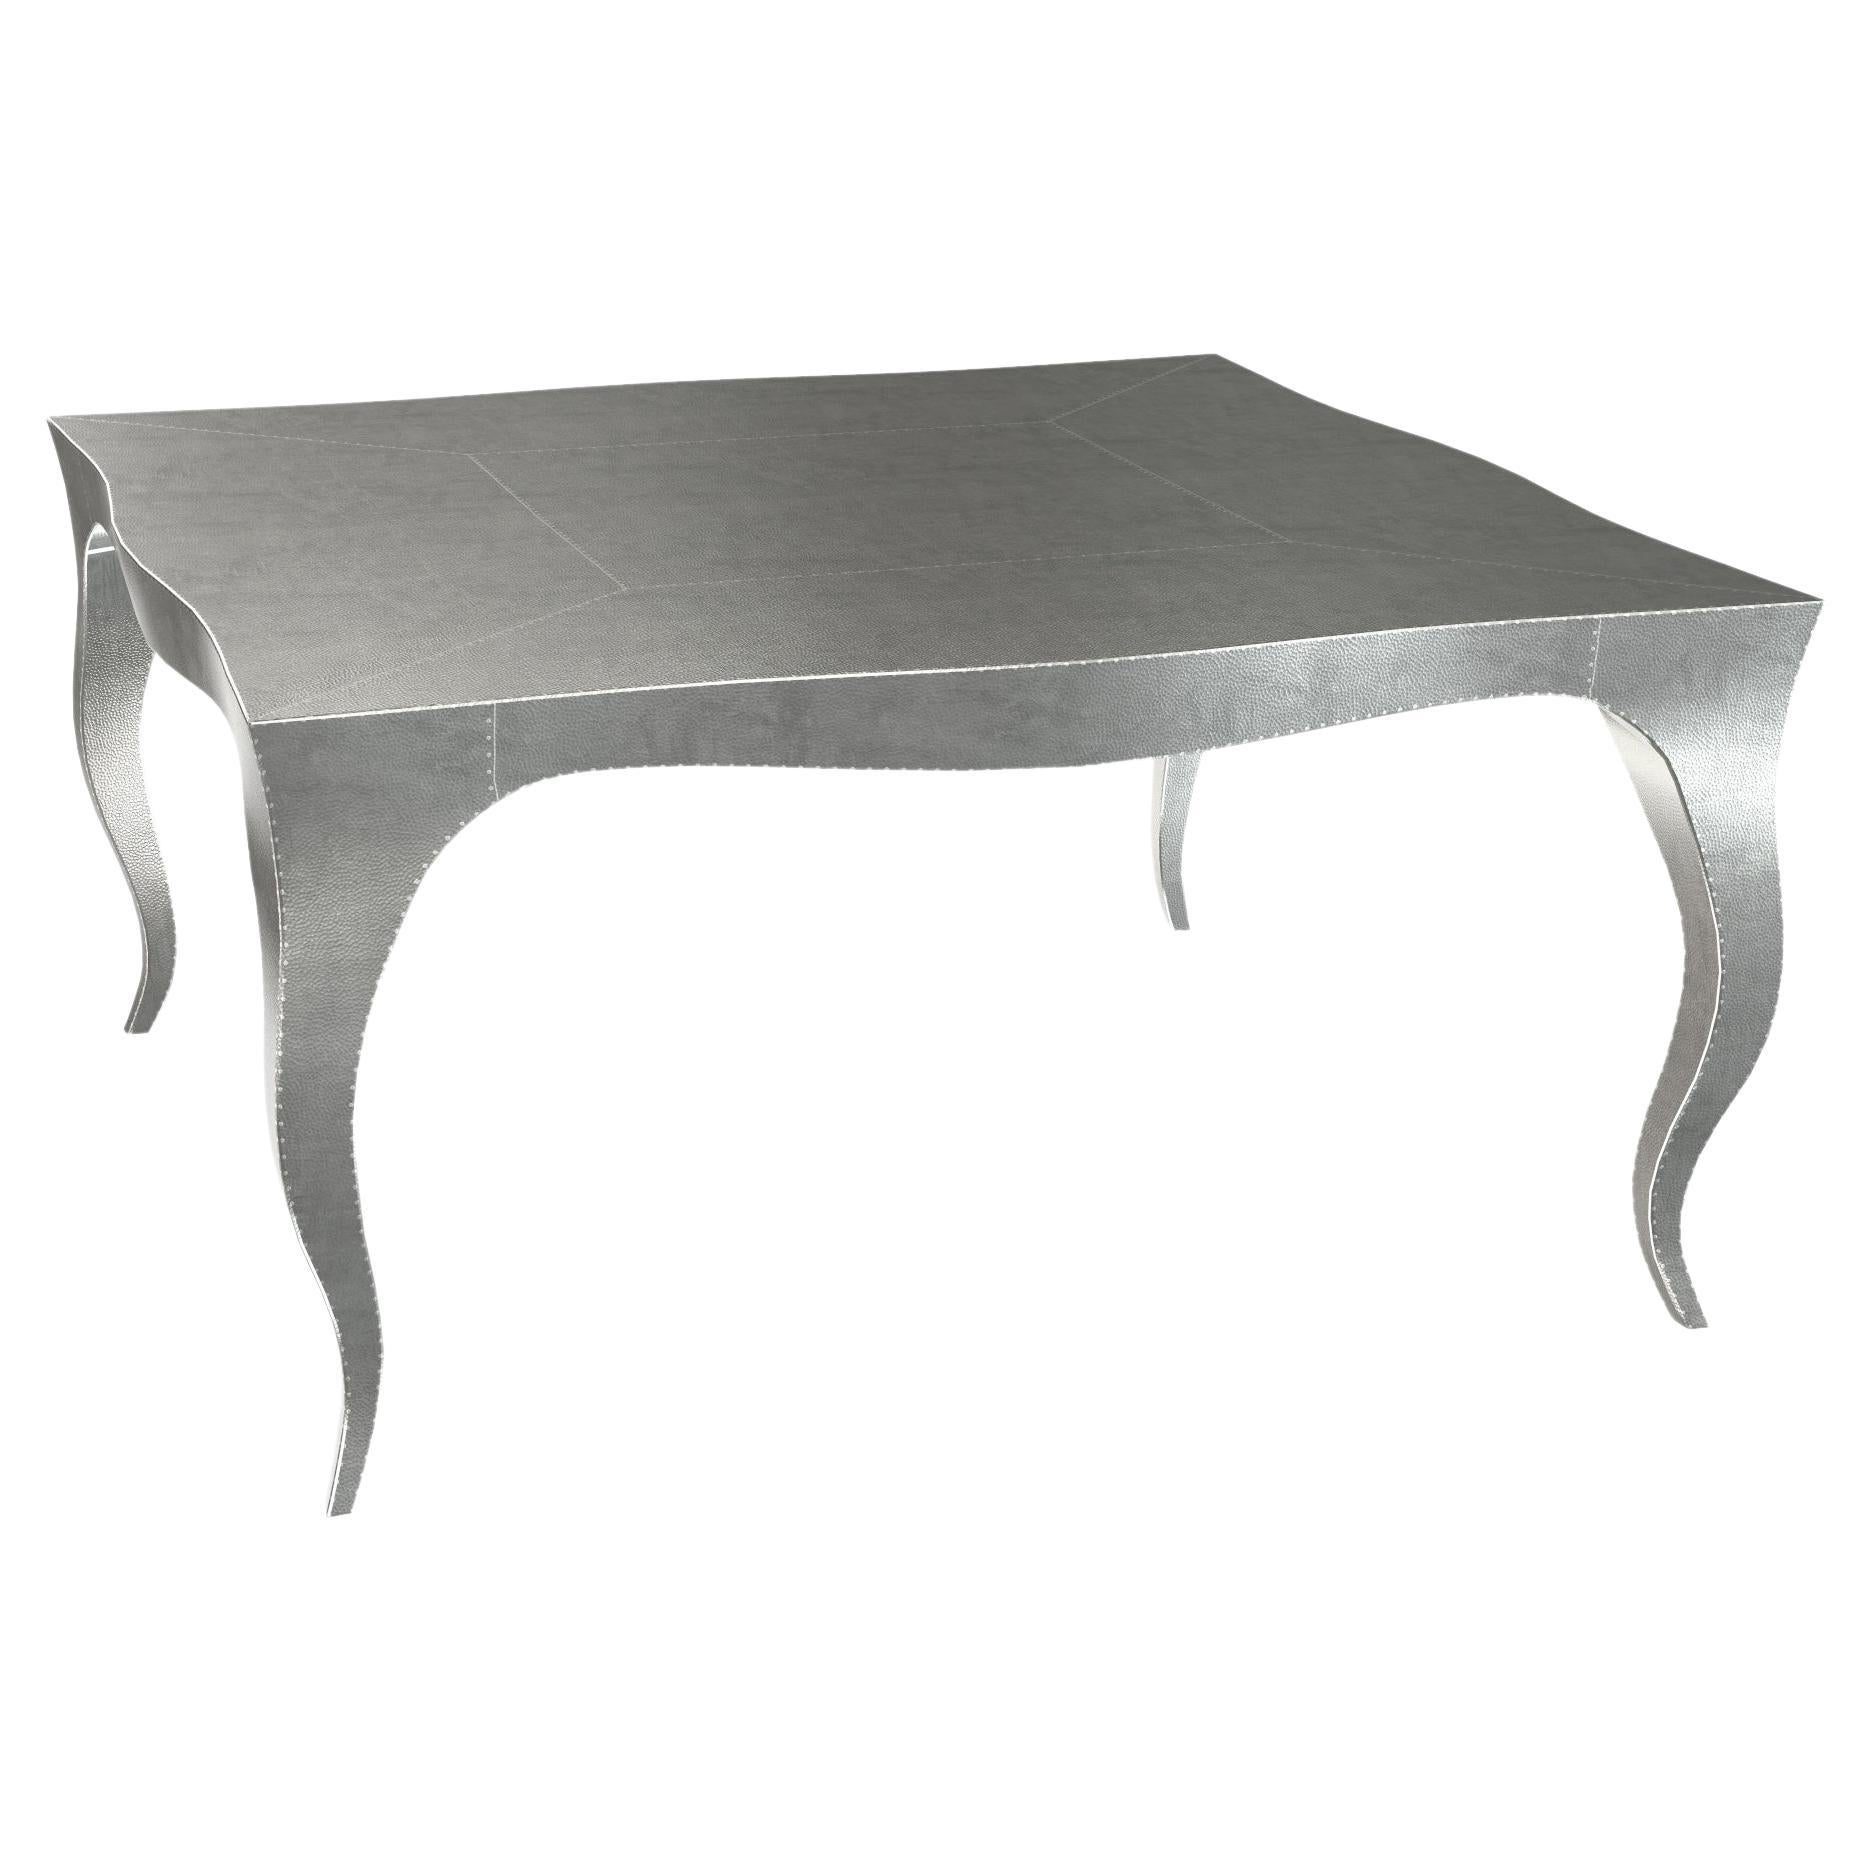 Louise Art Deco Nesting Tables and Stacking Tables Mid. Hammered White Bronze 